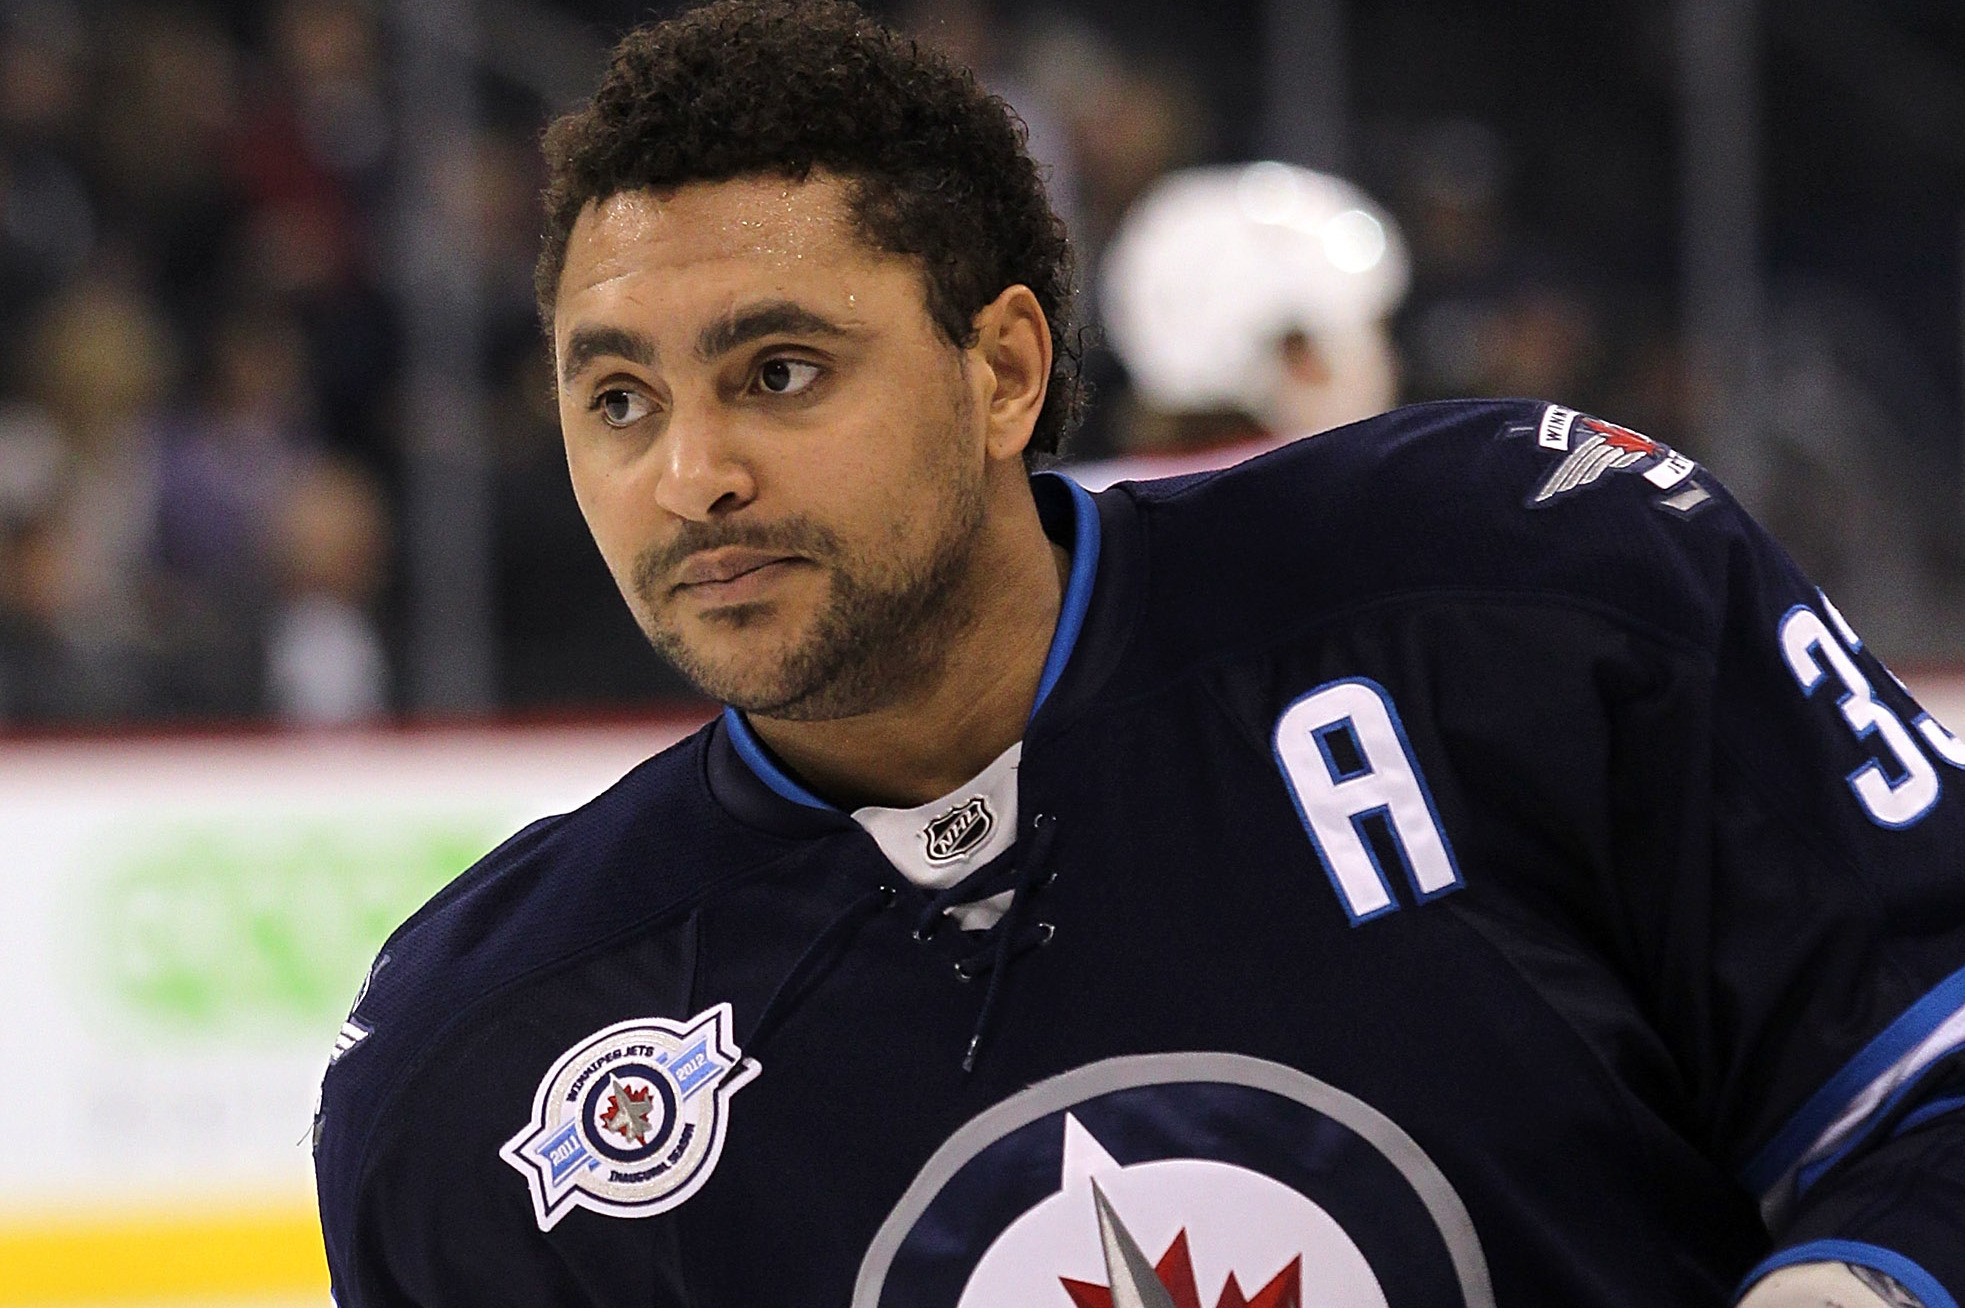 Dustin Byfuglien out 2-4 weeks with an upper body injury (Video)